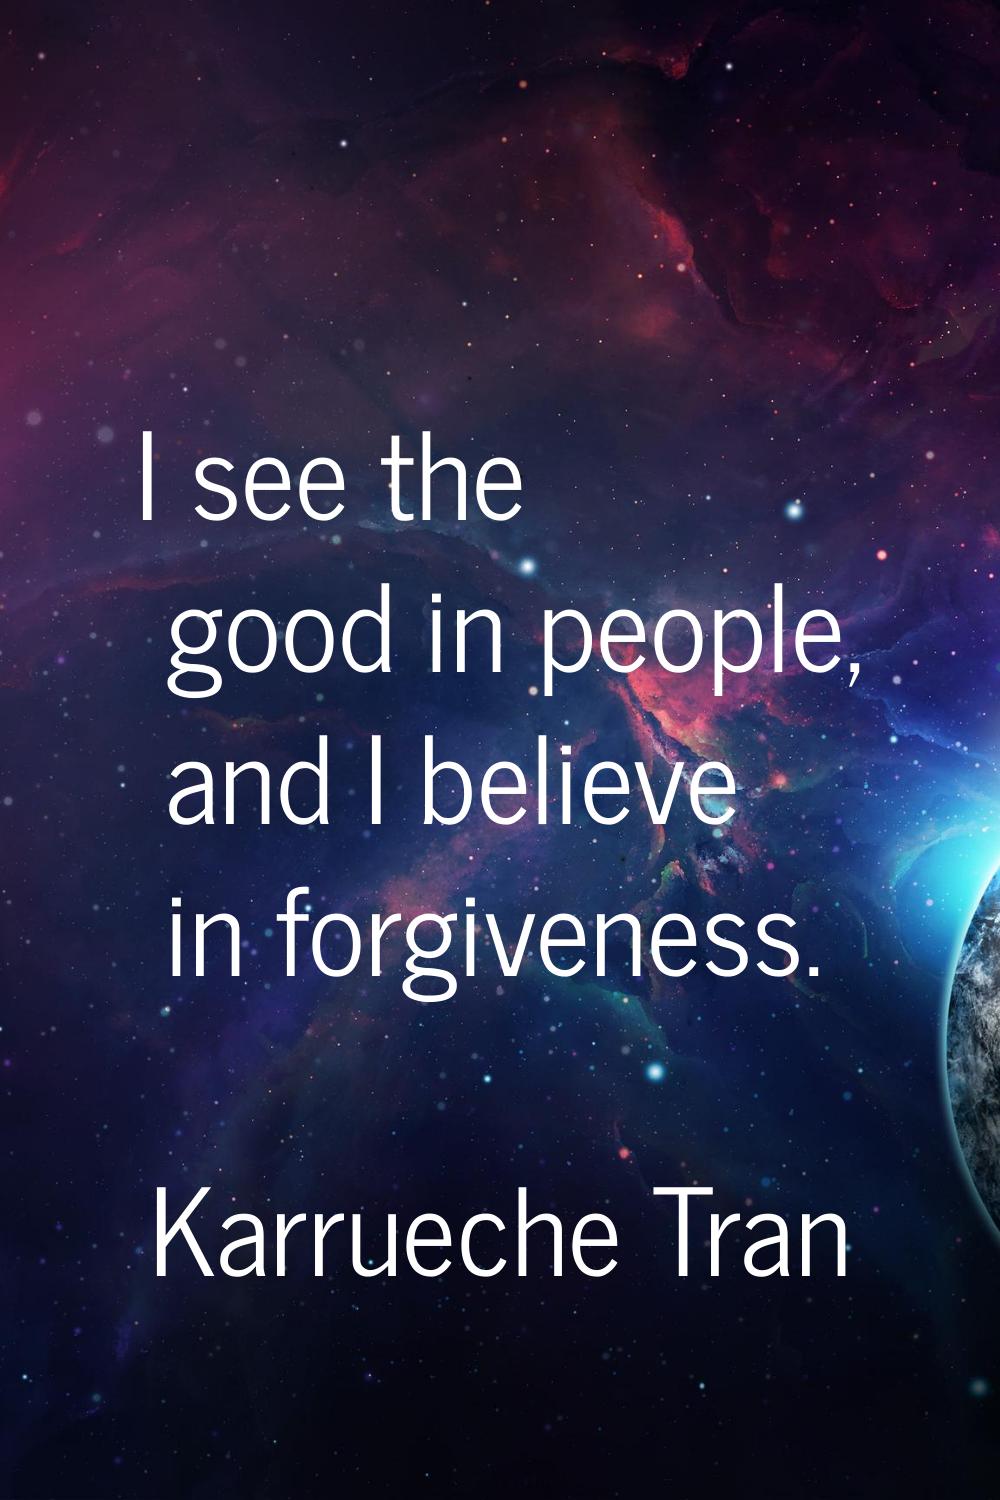 I see the good in people, and I believe in forgiveness.